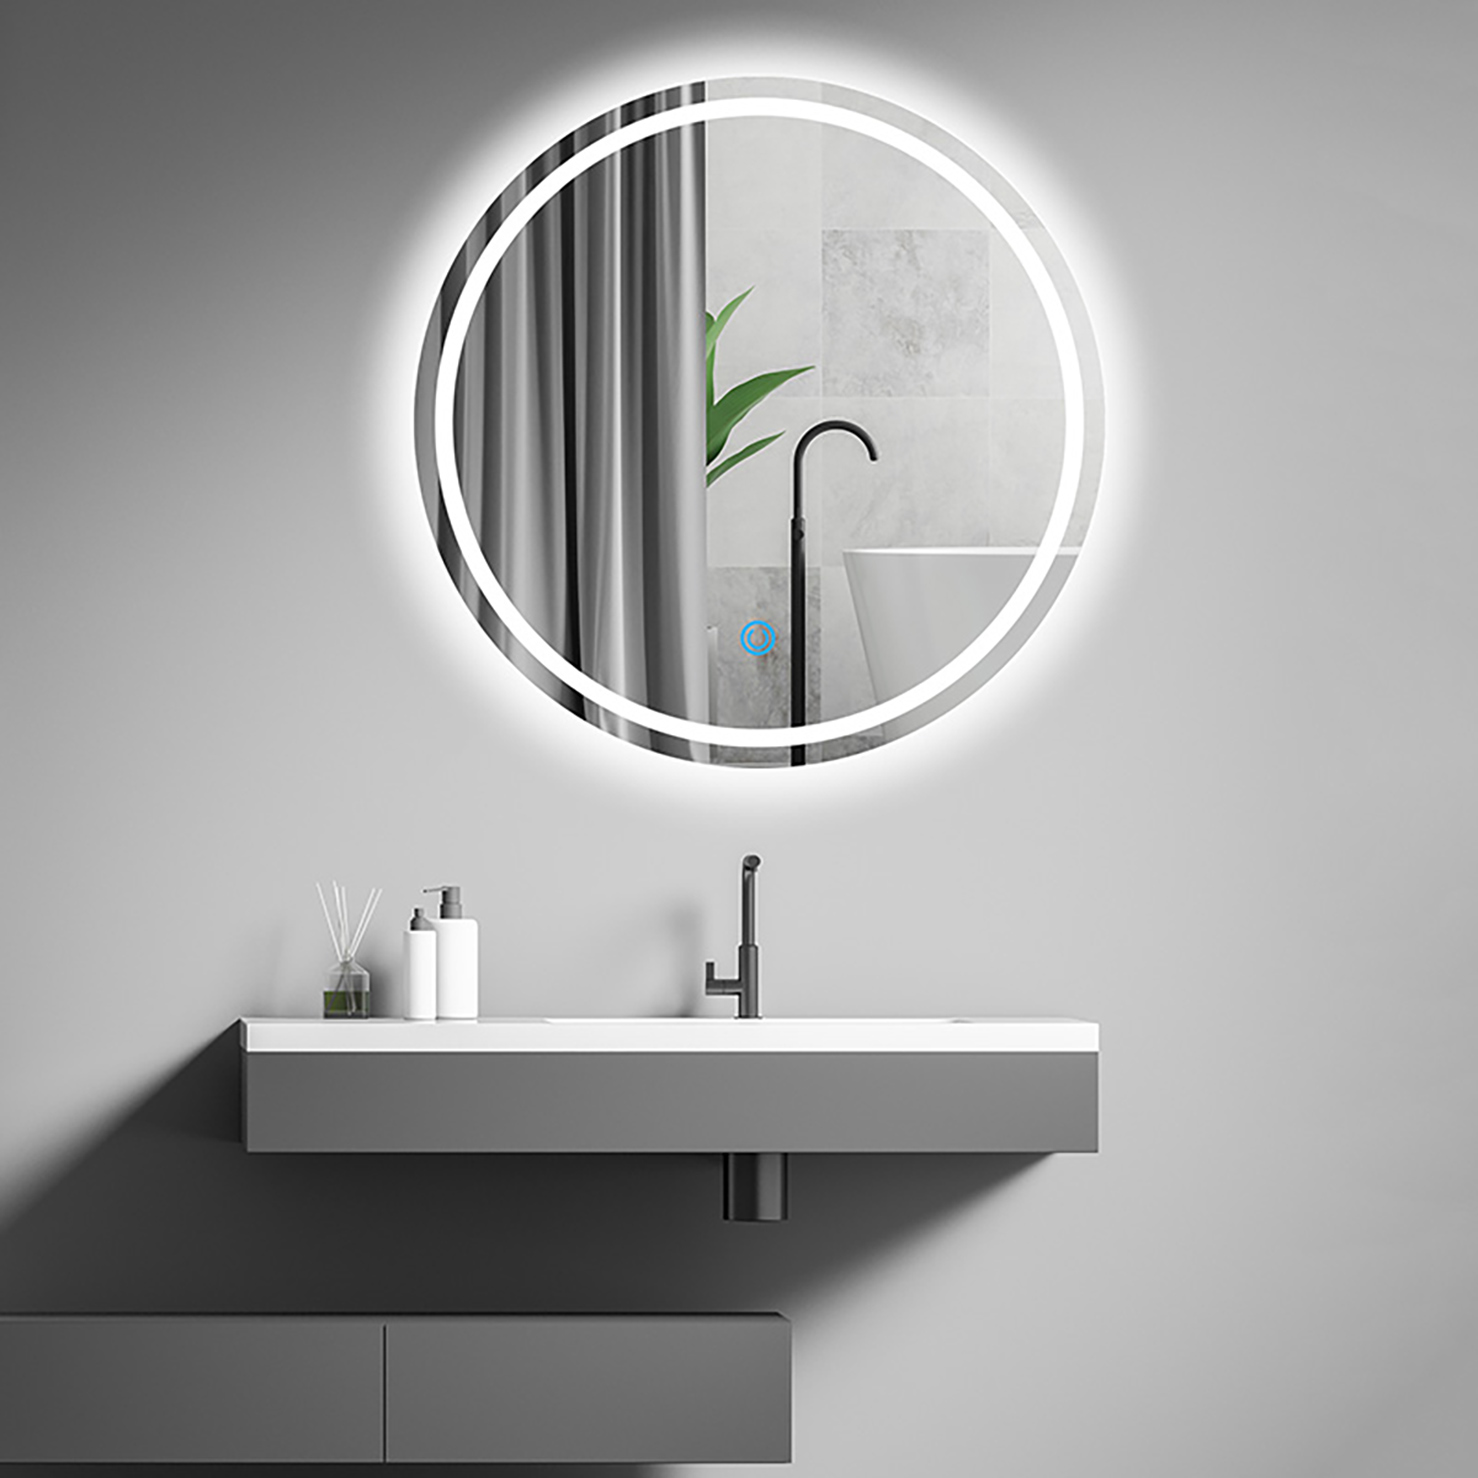 I-Modern-Smart-Mirror-Gold-Wall-Mounted-Shower-Silver-Circle-Mirror-For-Bathroom-8